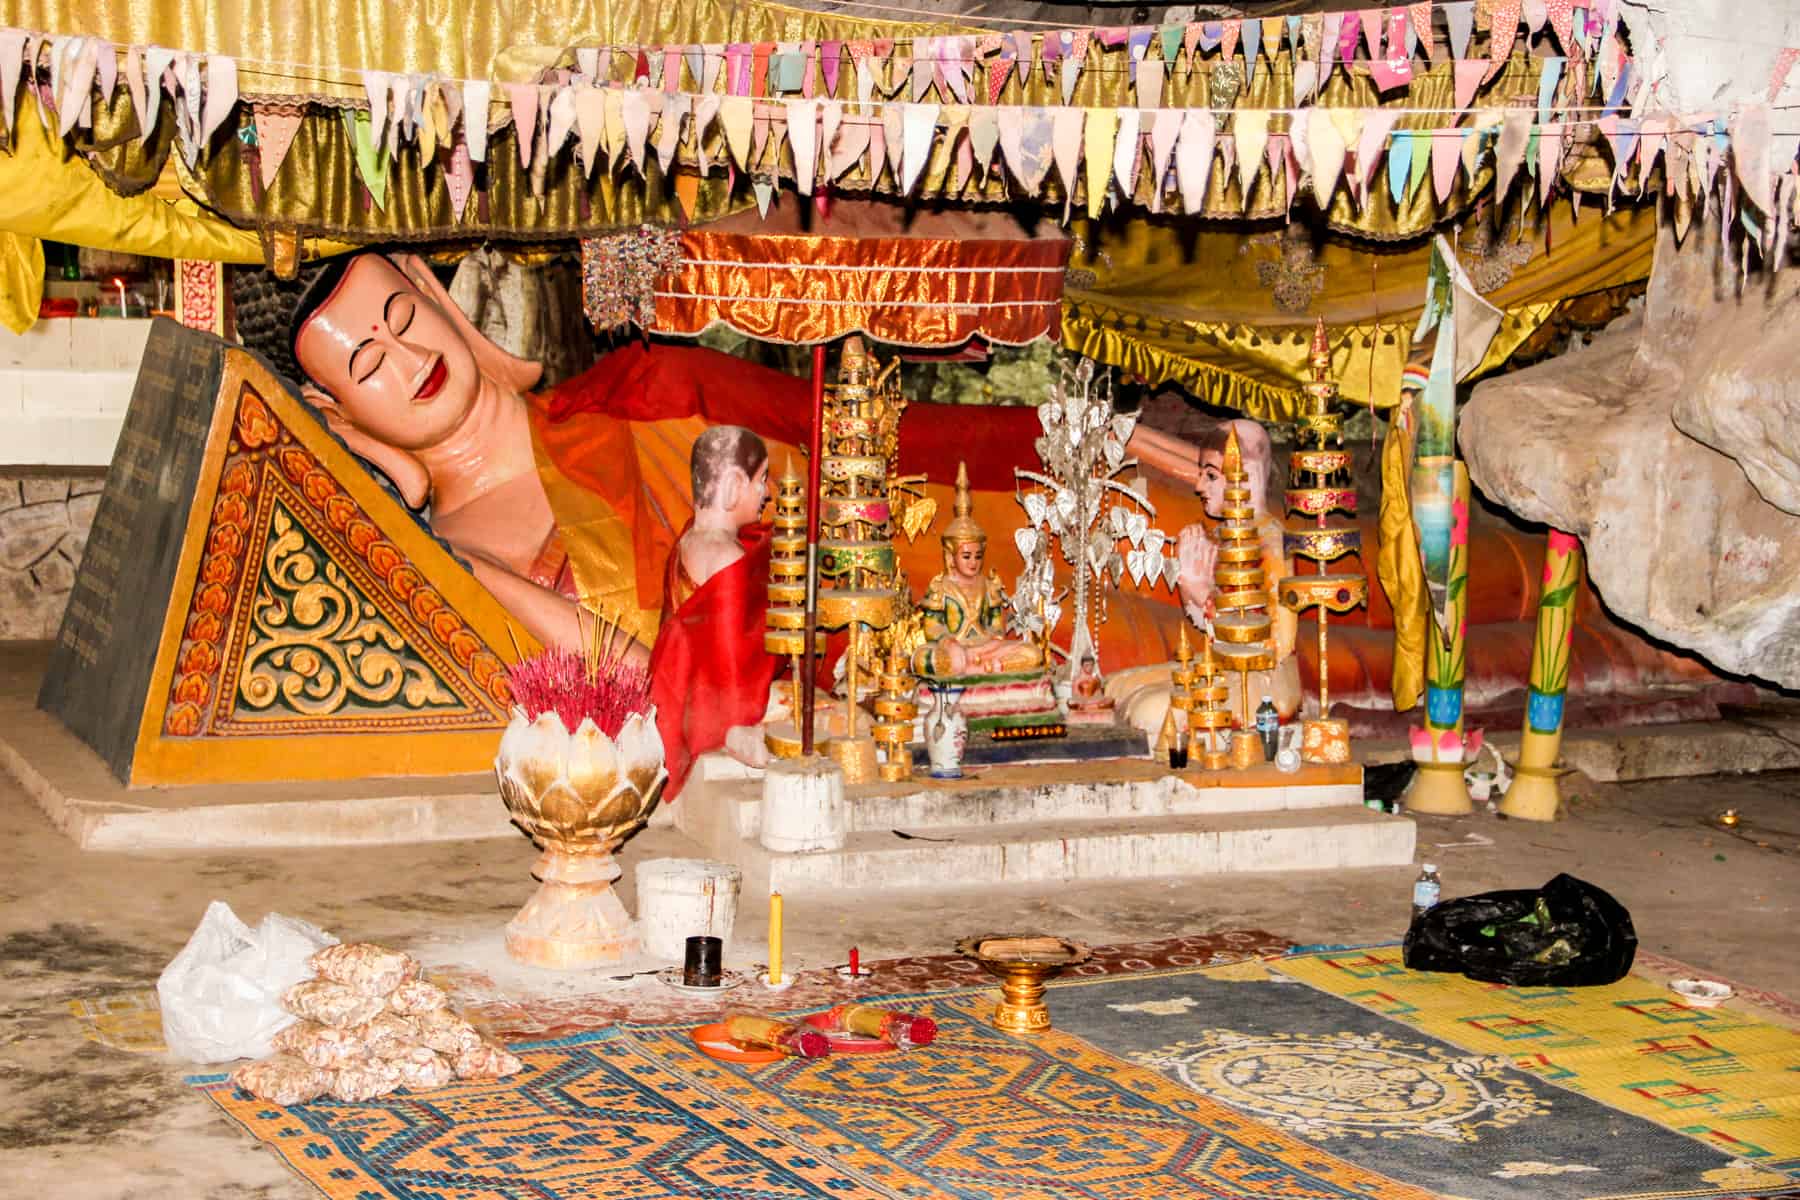 A reclining Buddah statue inside a cave, surrounded by rugs and prayer offerings.